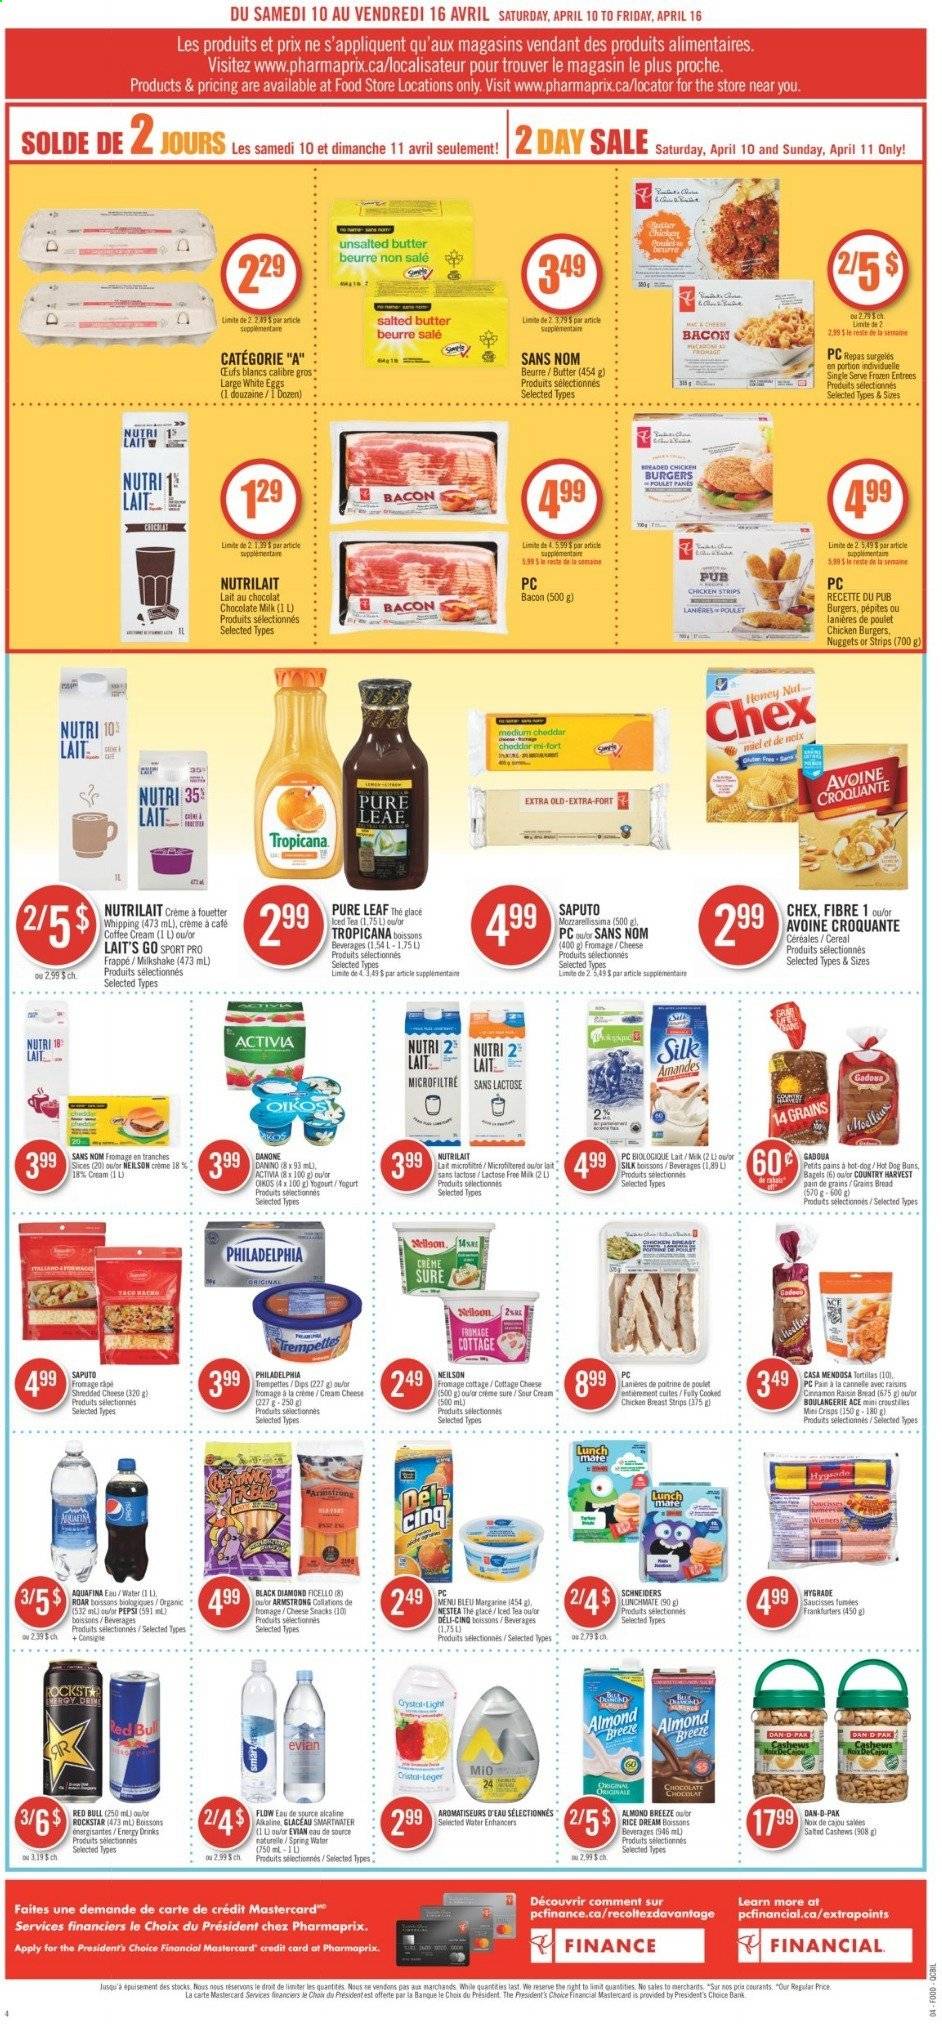 thumbnail - Pharmaprix Flyer - April 10, 2021 - April 16, 2021 - Sales products - bagels, bread, tortillas, buns, Ace, nuggets, hamburger, fried chicken, bacon, cottage cheese, shredded cheese, cheddar, Président, yoghurt, Oikos, milkshake, Silk, Almond Breeze, eggs, margarine, salted butter, sour cream, Country Harvest, strips, chicken strips, milk chocolate, chocolate, snack, cereals, cashews, dried fruit, Pepsi, Red Bull, Rockstar, Aquafina, Smartwater, Evian, tea, Pure Leaf, coffee, chicken, Sure, raisins. Page 4.